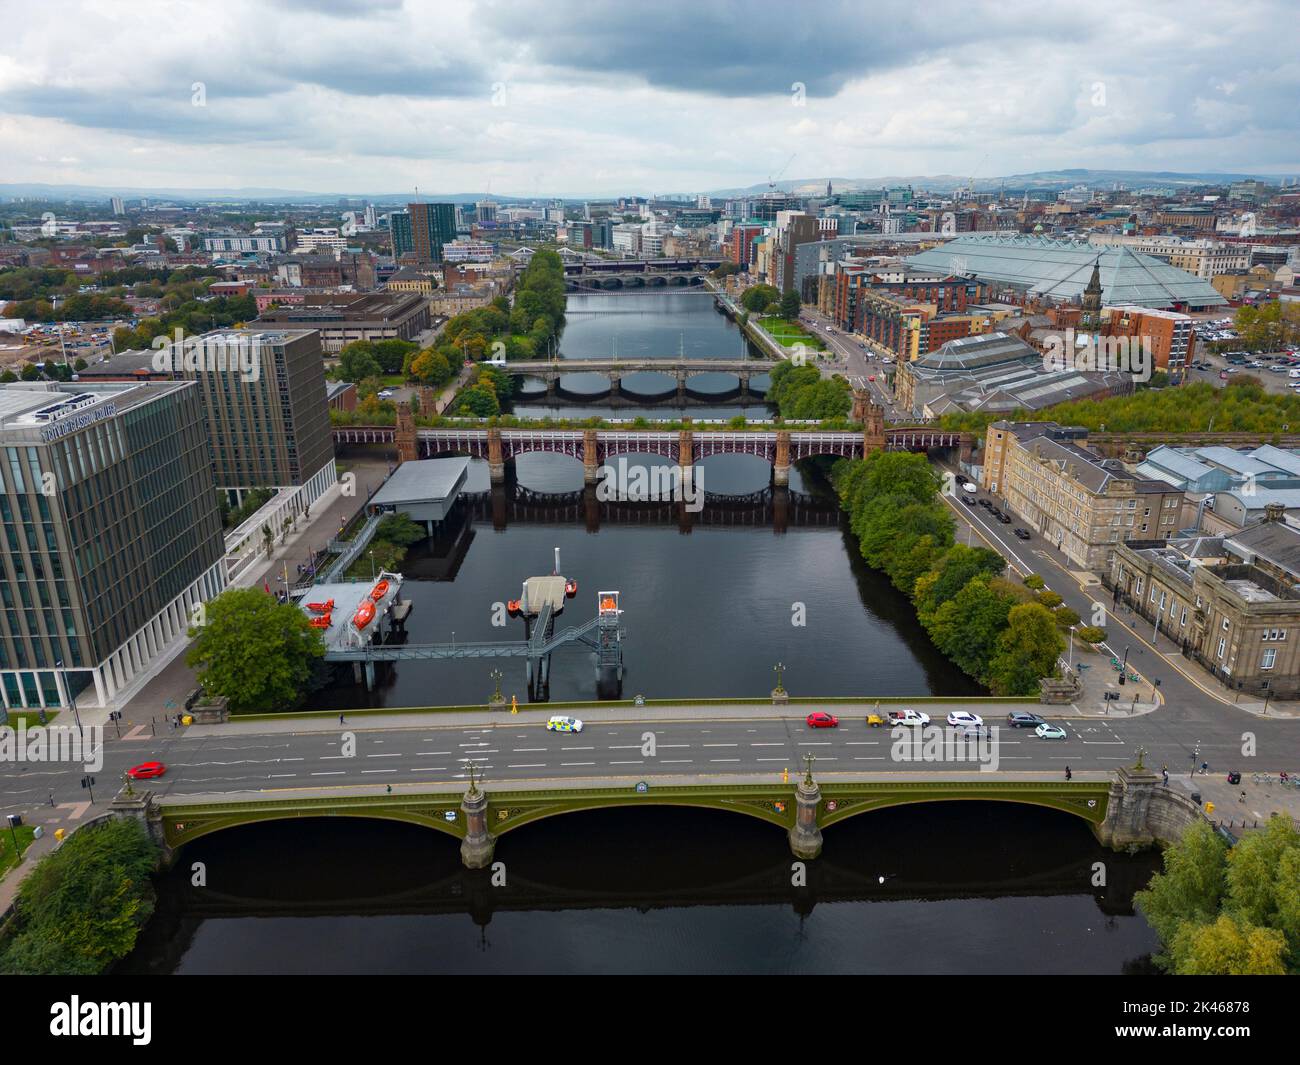 Aerial view of bridges crossing the River Clyde in Glasgow, Scotland, UK Stock Photo